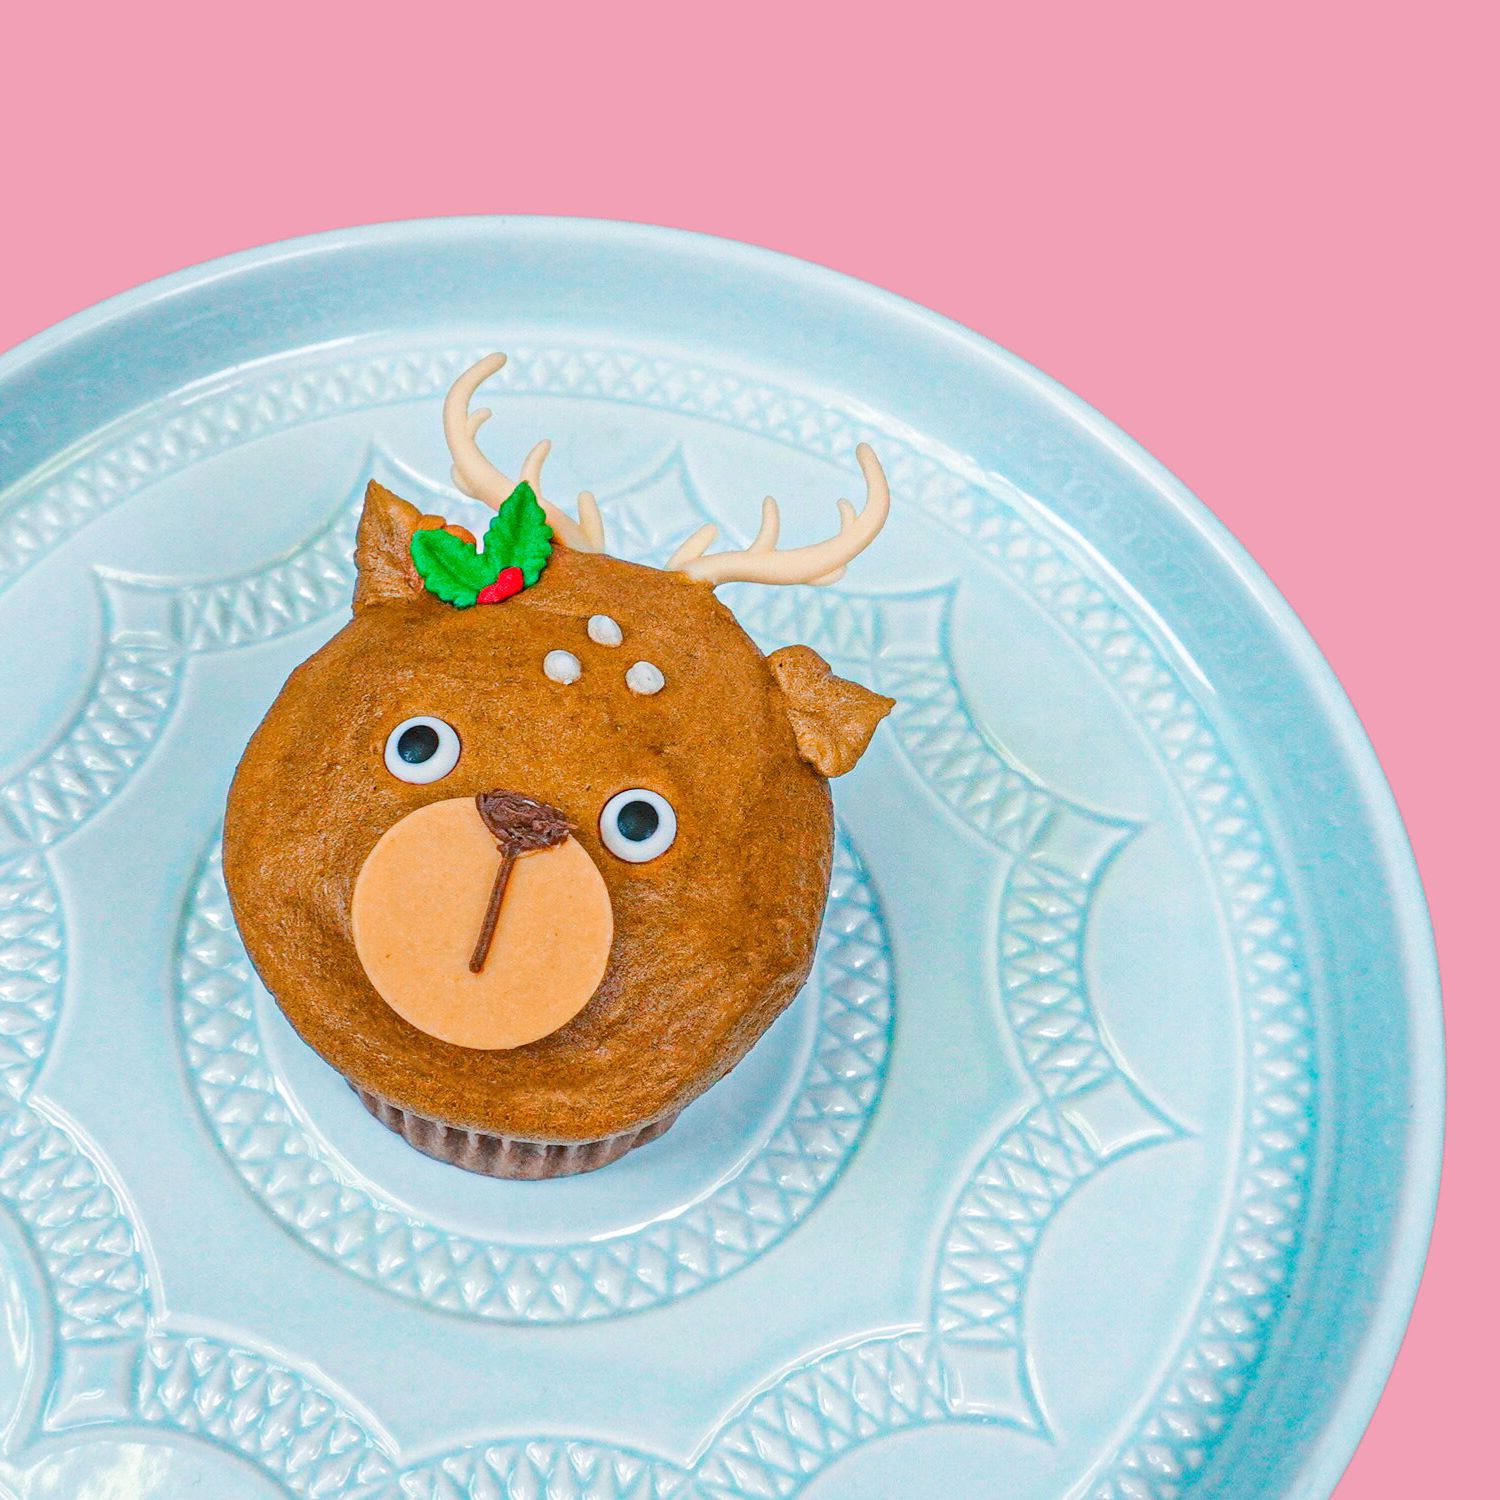 cupcake decorated to look like a reindeer